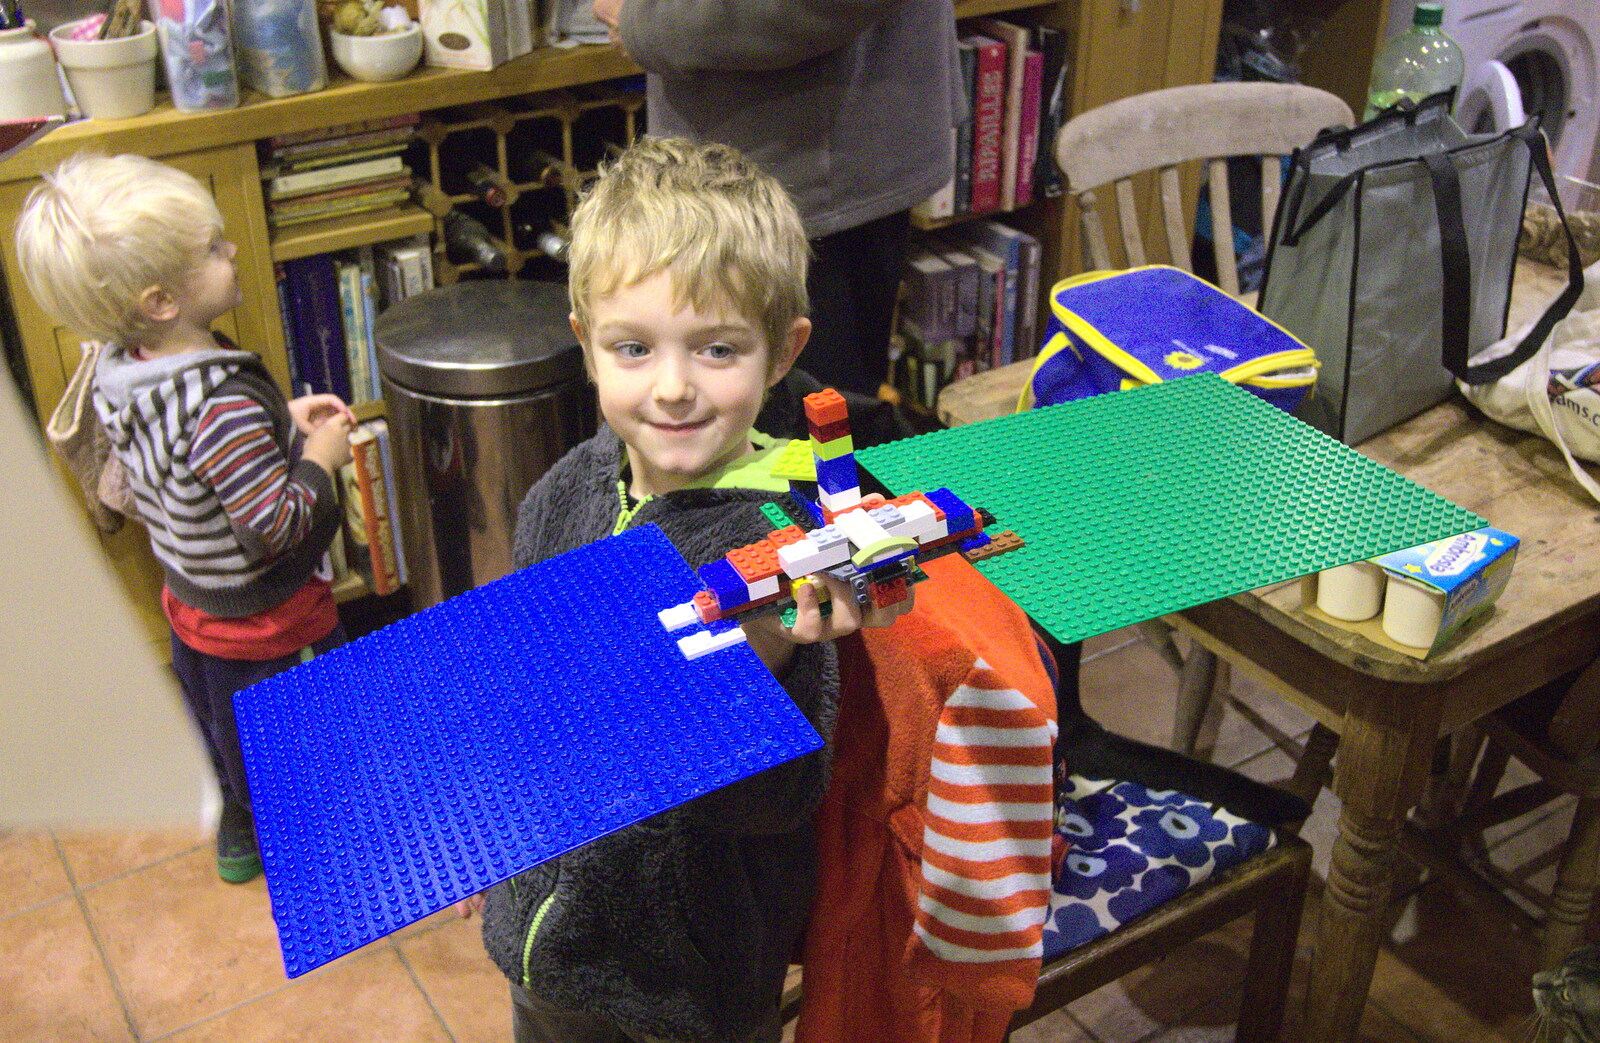 Fred shows off his rather impressive Lego satellite from November Singing, Gislingham Primary School, Suffolk - 17th November 2014